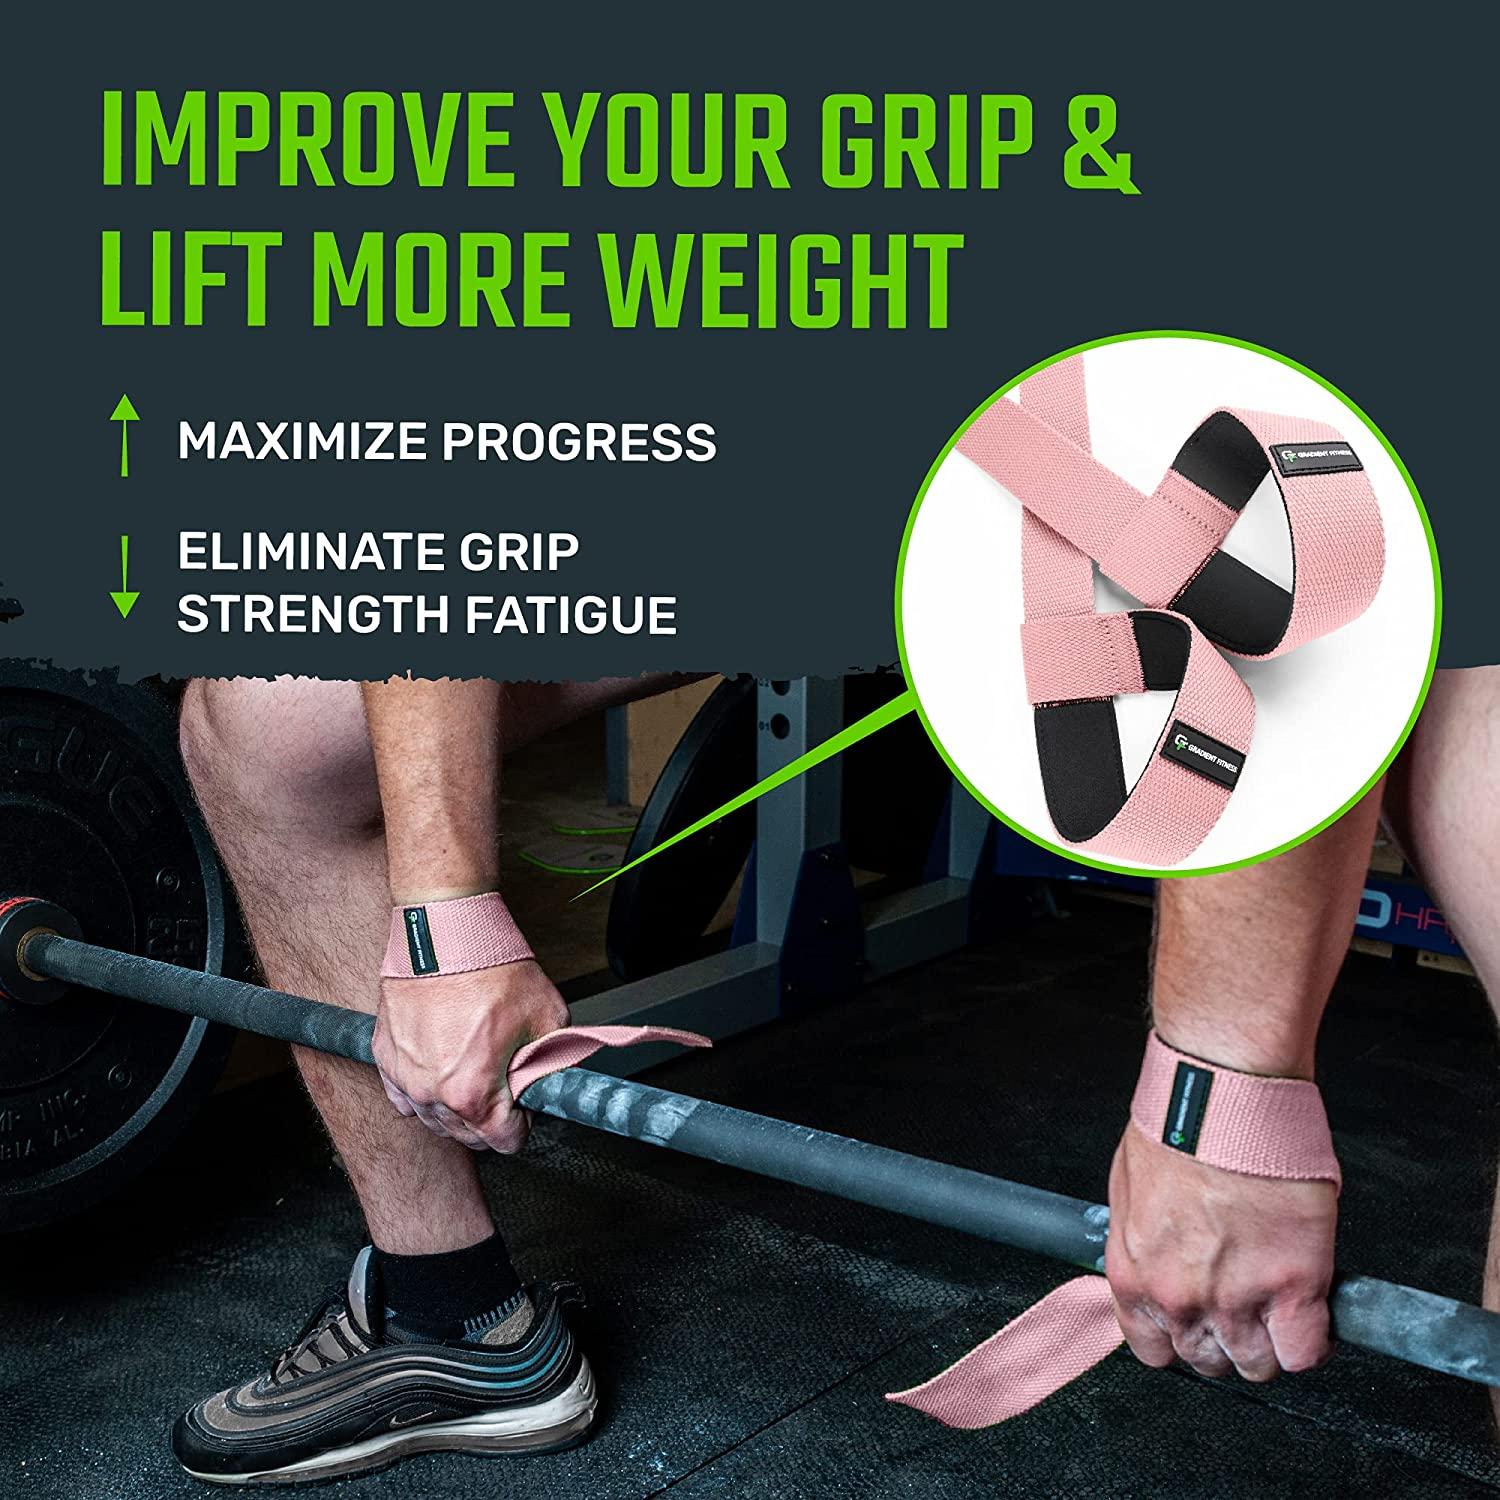 HOW TO USE LIFTING STRAPS CORRECTLY #shorts #deadlift 